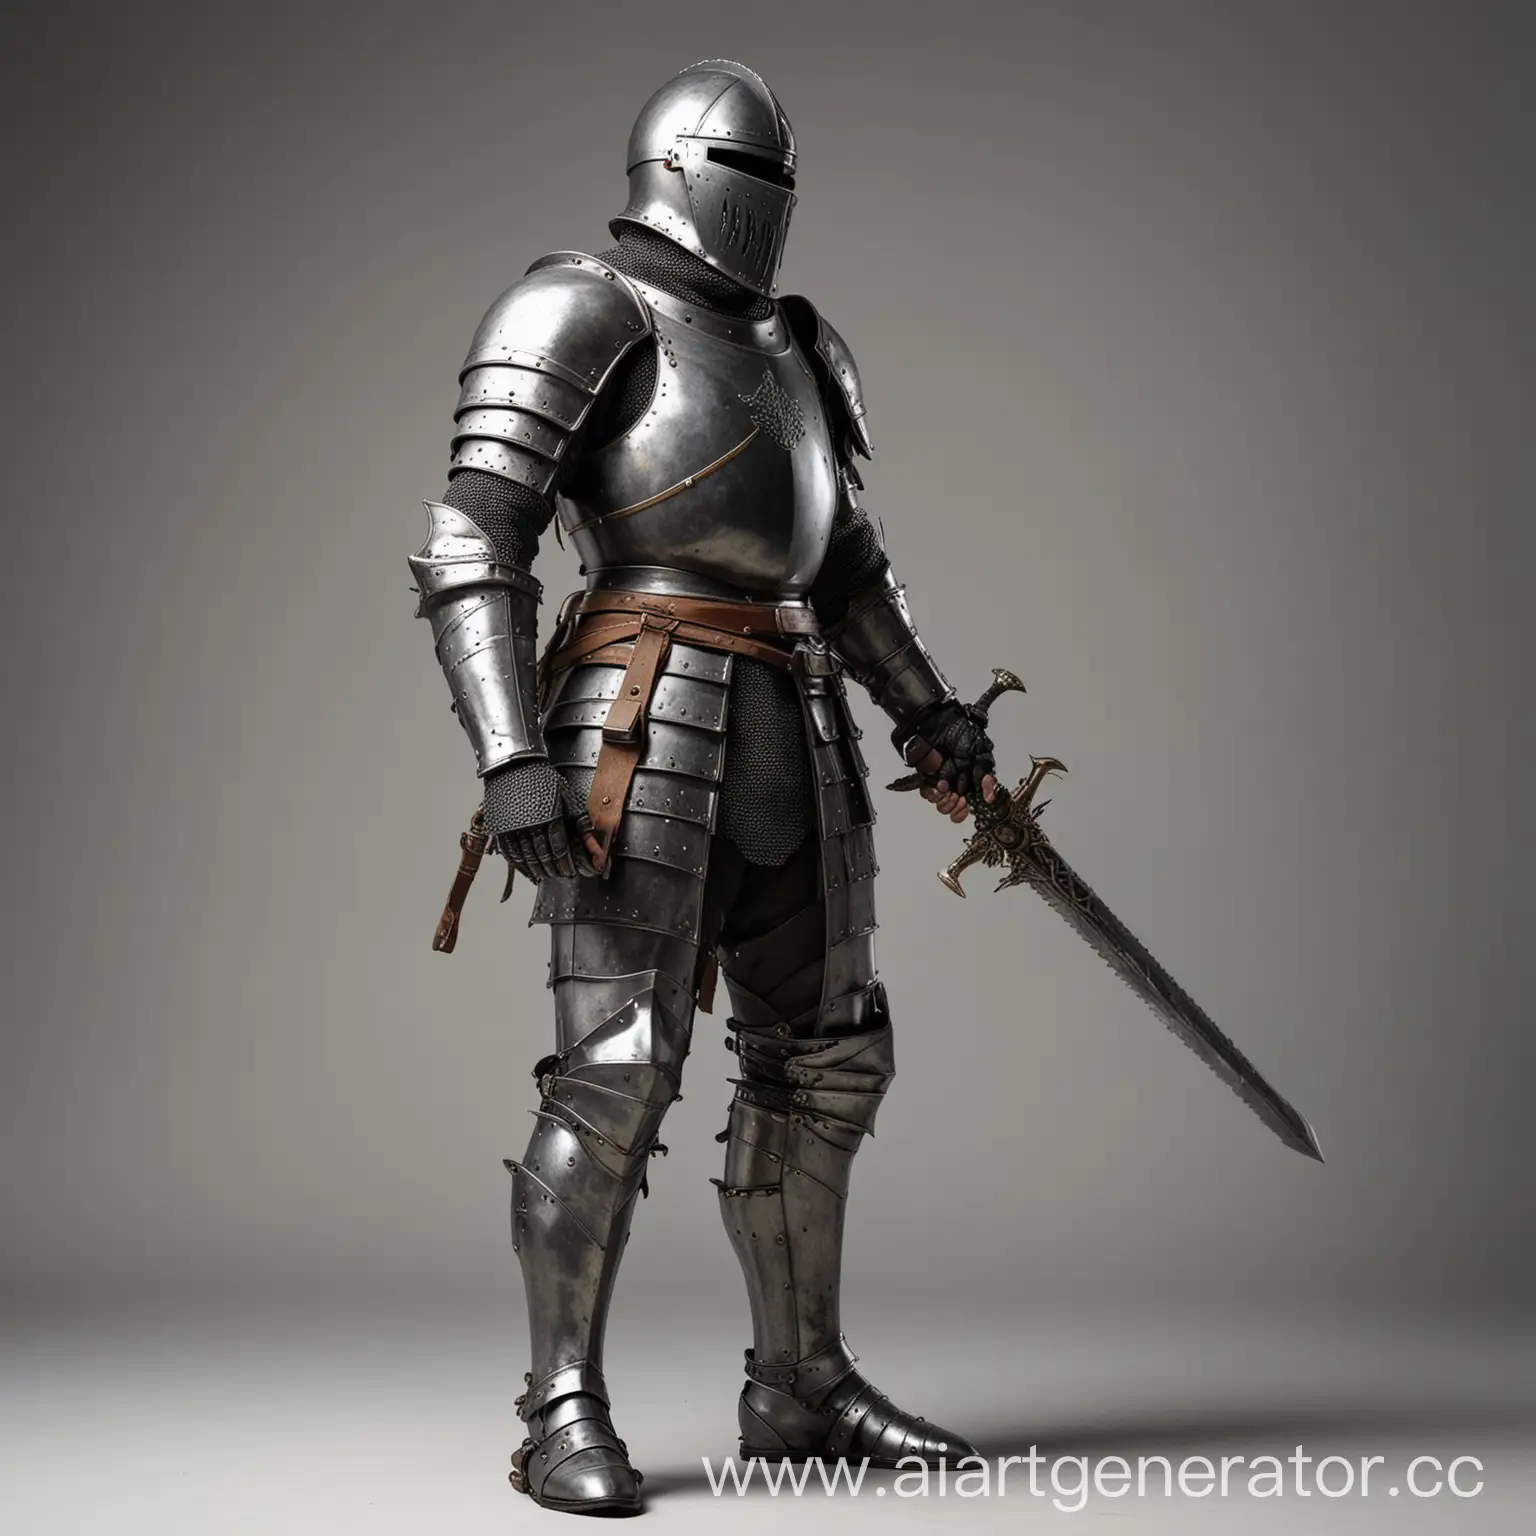 Profile-of-Armored-Knight-Holding-Weapon-in-Hand